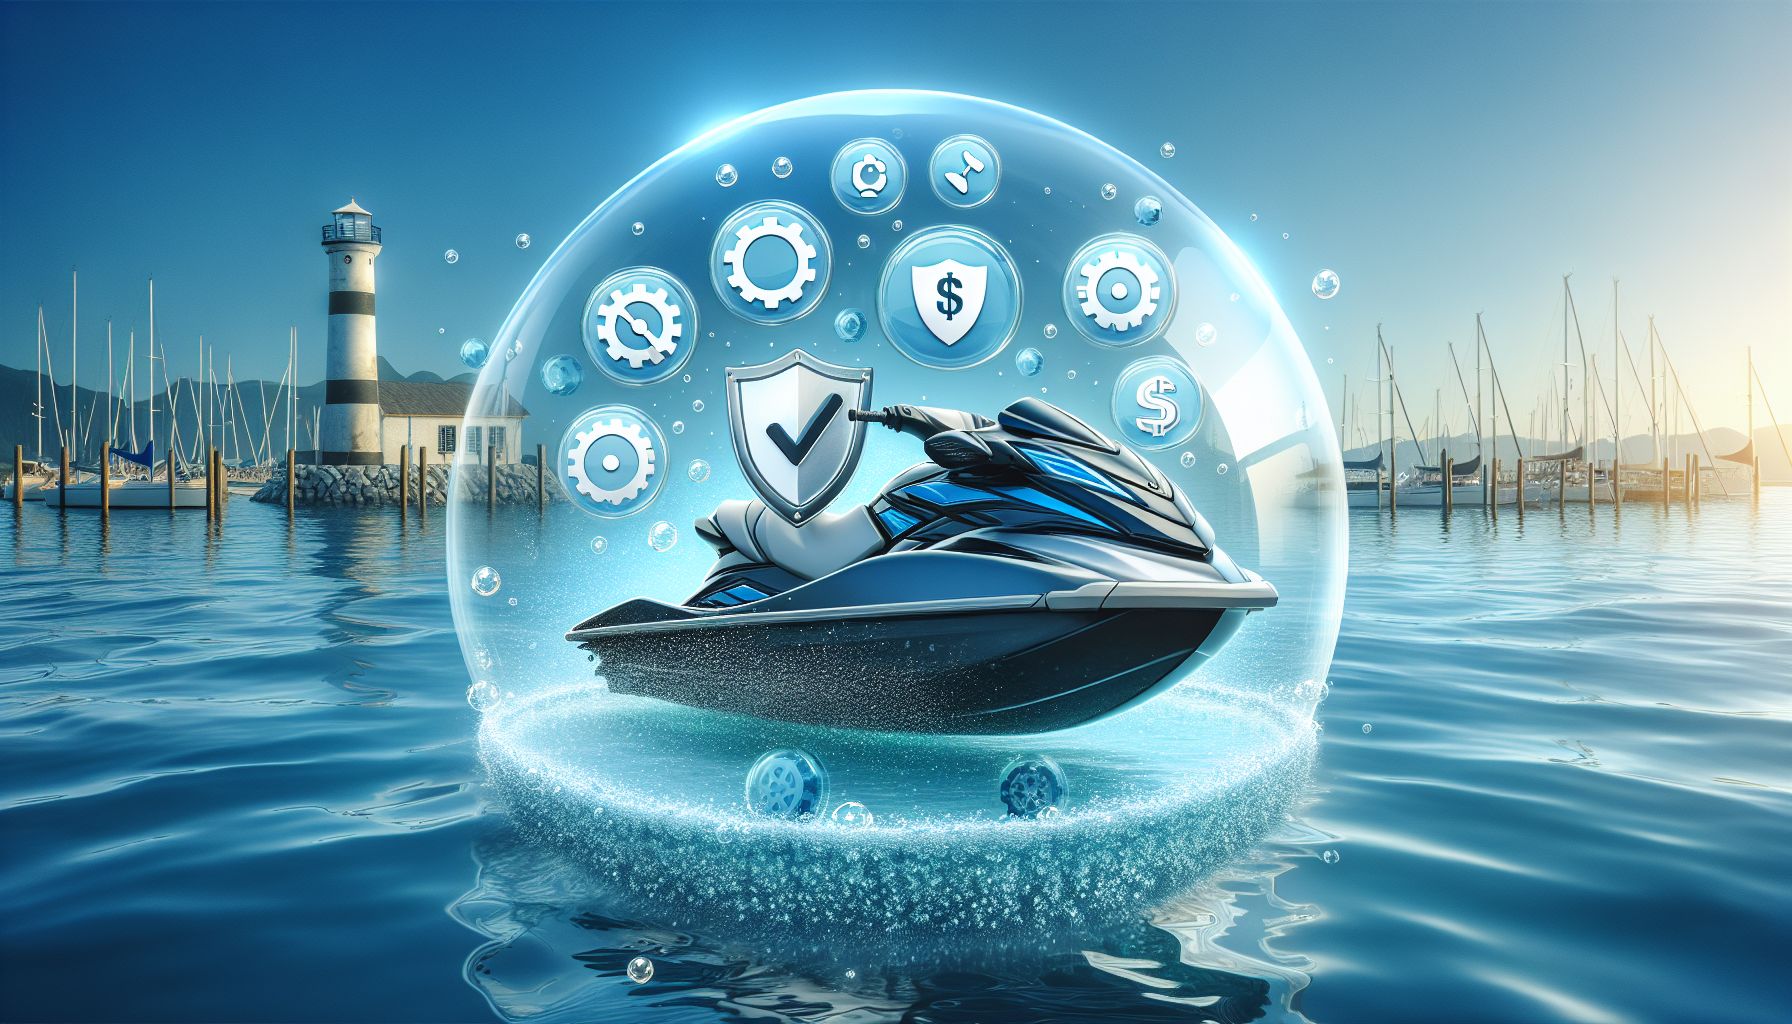 Personal watercraft warranty coverage in a marine setting